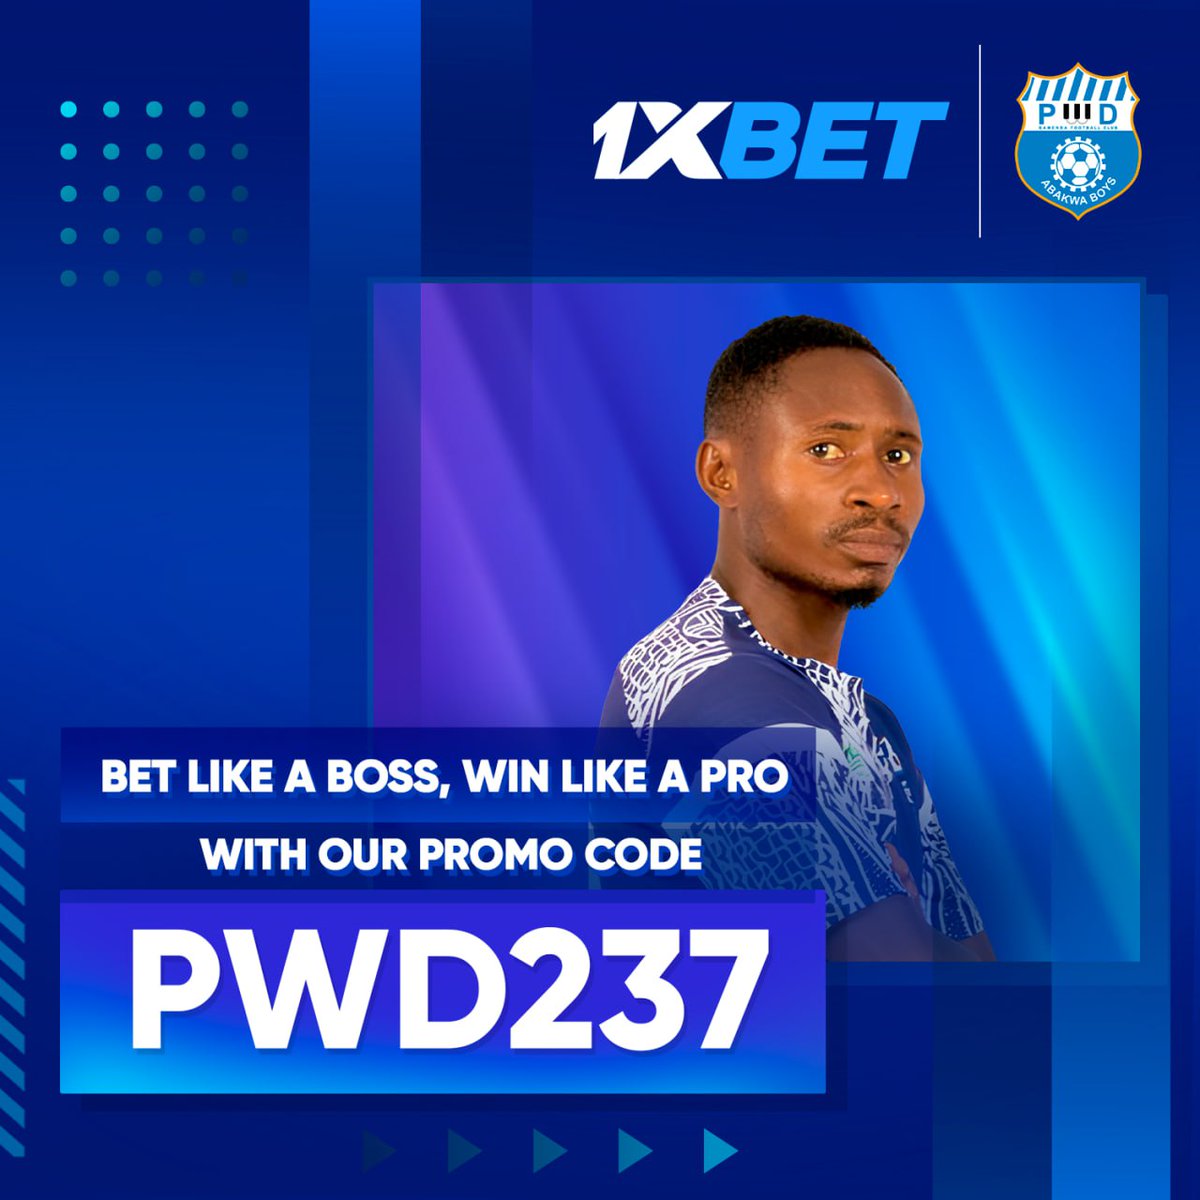 🔥 Bet like a pro, win like a champ! Use our promo code PWD237 for up to 169 000 XAF on your first 1xBet deposit! Use some of my betting tips to succeed: study teams, diversify bets, consider odds. Register now: tinyurl.com/2esrrg99 and good luck! 🚀